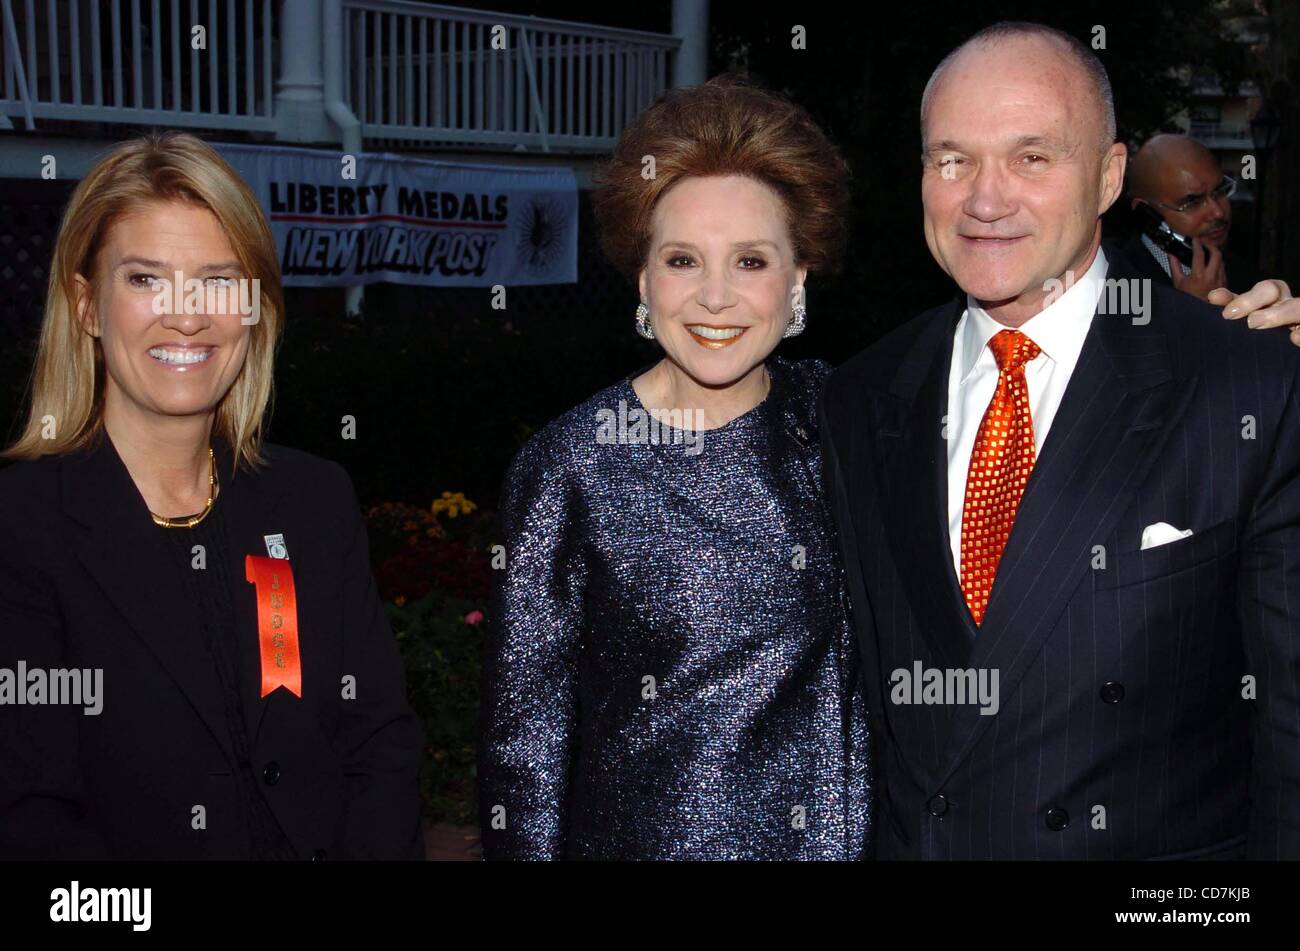 Oct. 7, 2004 - New York, New York, U.S. - K39838JKRON.THE NEW YORK POST ANNOUNCES WINNERS OF THE 3RD ANNUAL LIBERTY MEDALS HONORING NEW YORK'S EVERYDAY HEROES GRACIE MANSION.NEW YORK New York 10/07/2004.  /   2004..GRETA VAN SUSTEREN, CINDY ADAMS, POLICE COMMISSIONER RAYMOND KELLY(Credit Image: Â© J Stock Photo